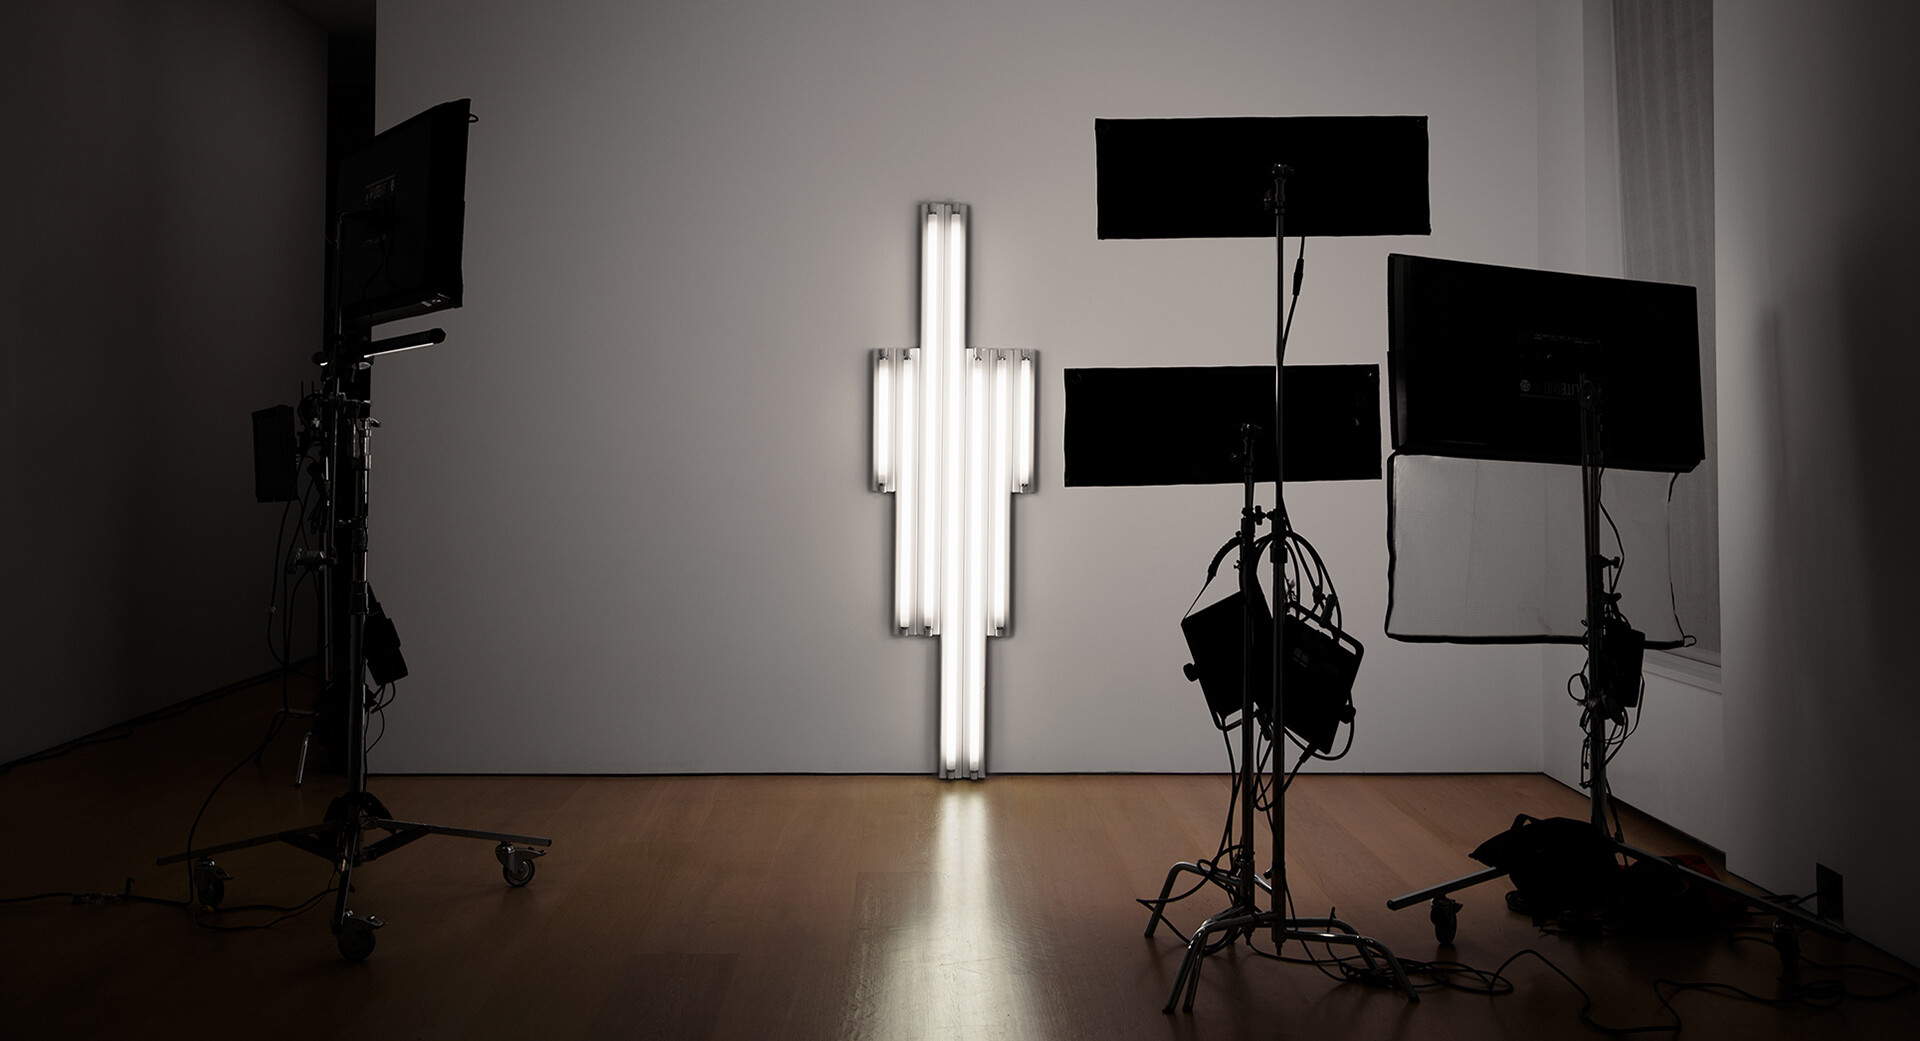 A photo of the filming set up for the miami NY viewing room livestream at David Zwirner, New York, in 2020.